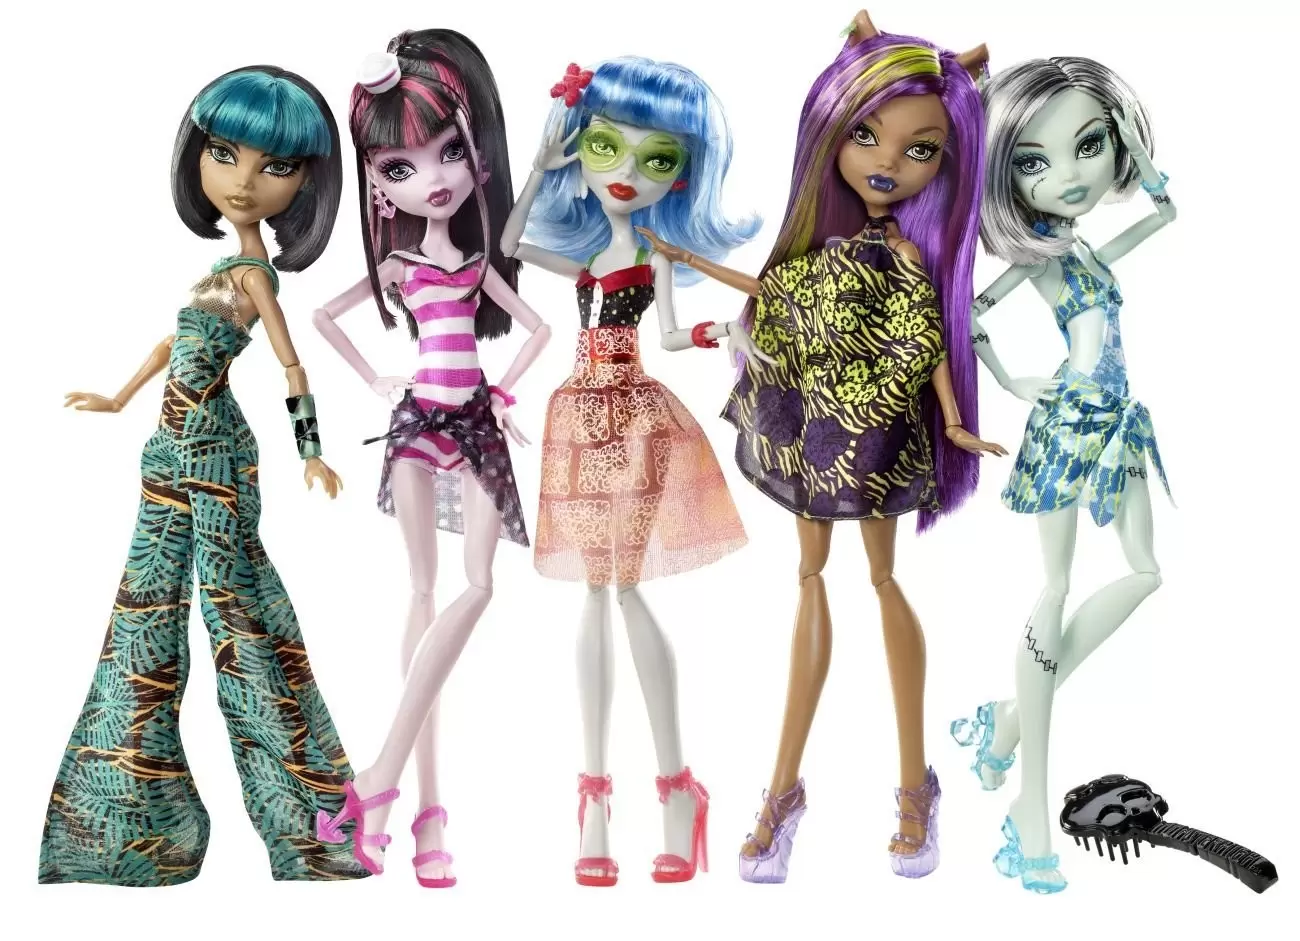 Monster High Dolls - Cleo, Draculaura, Ghoulia, Clawdeen & Frankie (5-pack) - Skull Shores